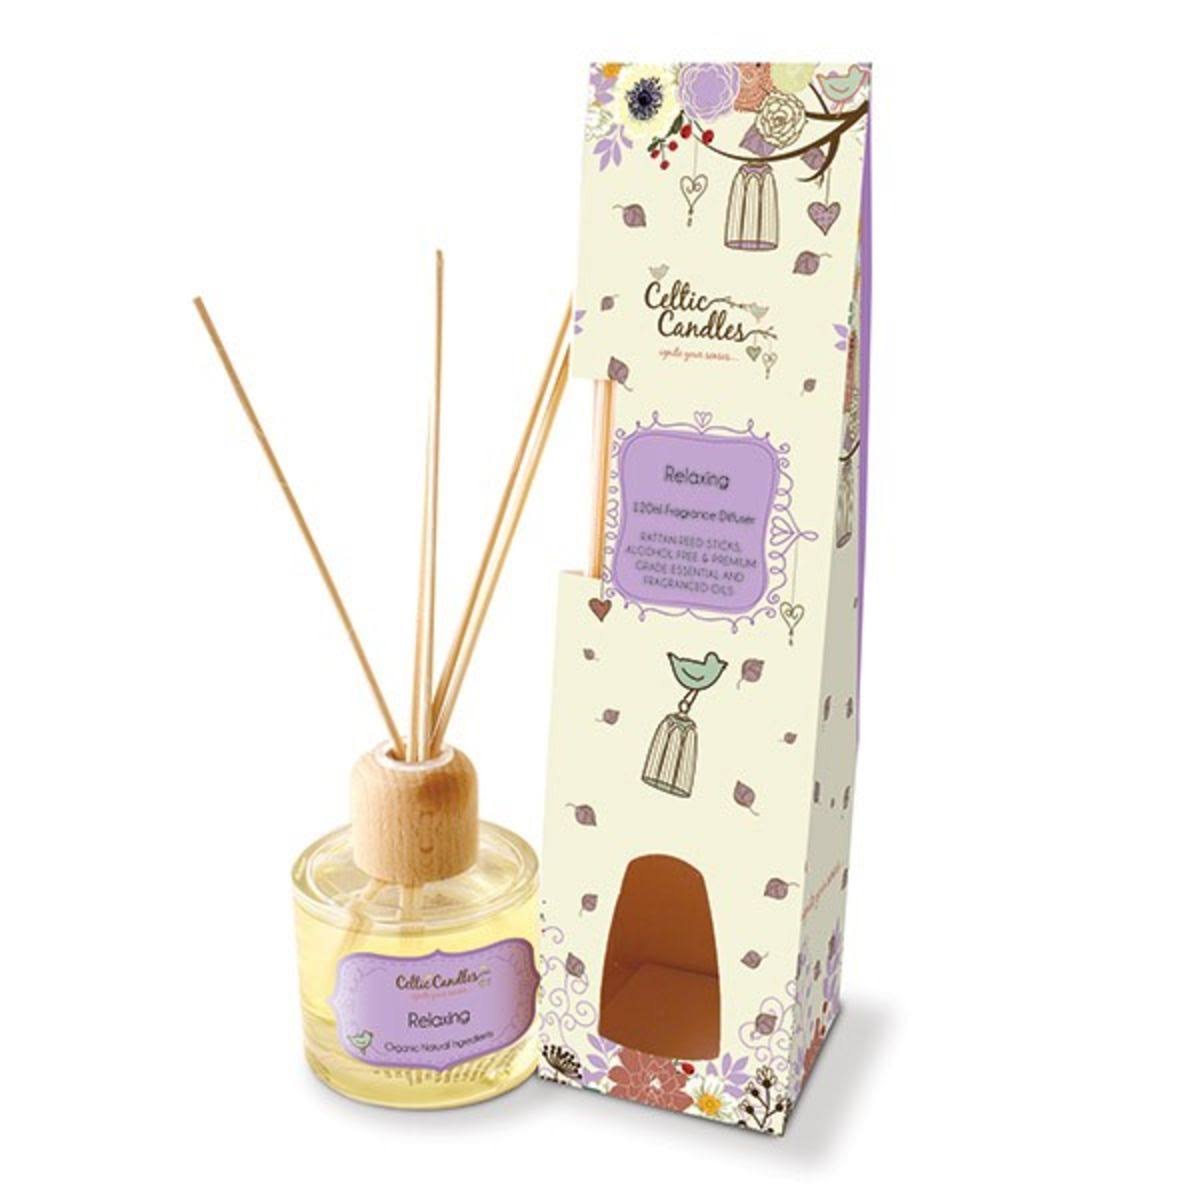 Celtic Candles Relaxing Diffuser